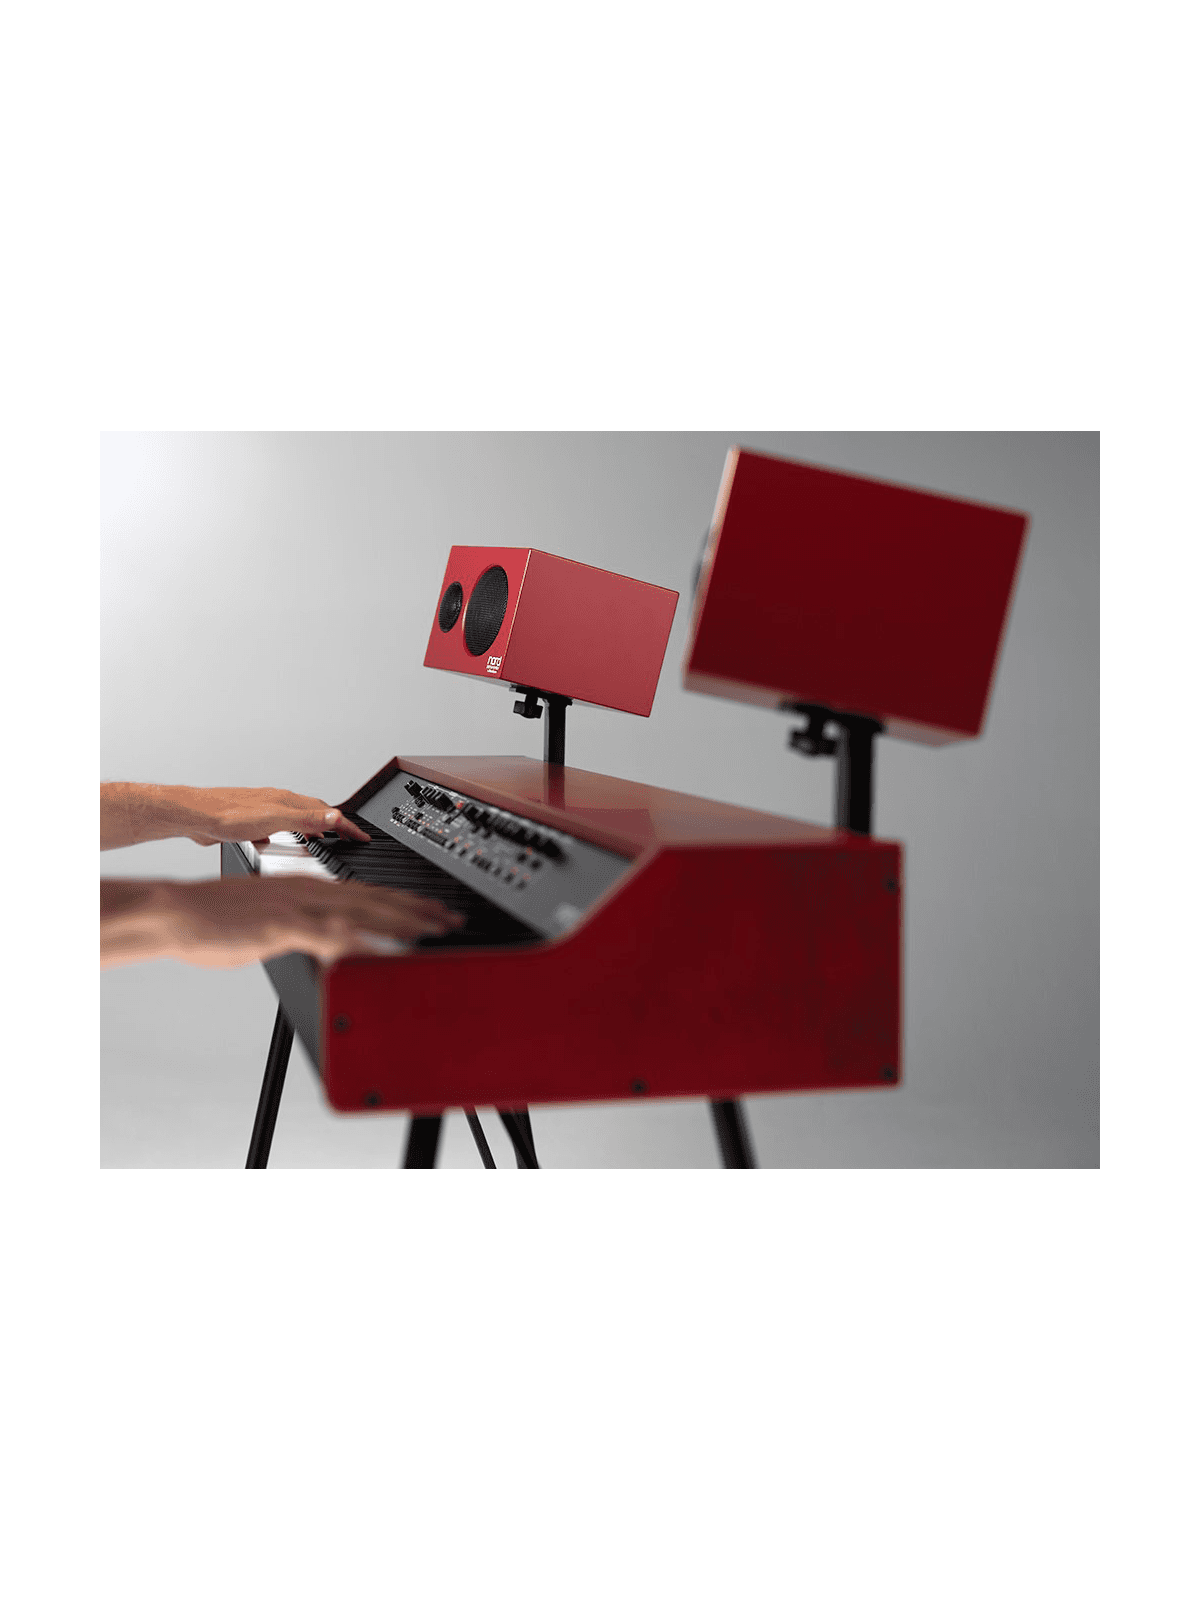 NP-MONITORV2 Pour clavier NORD 